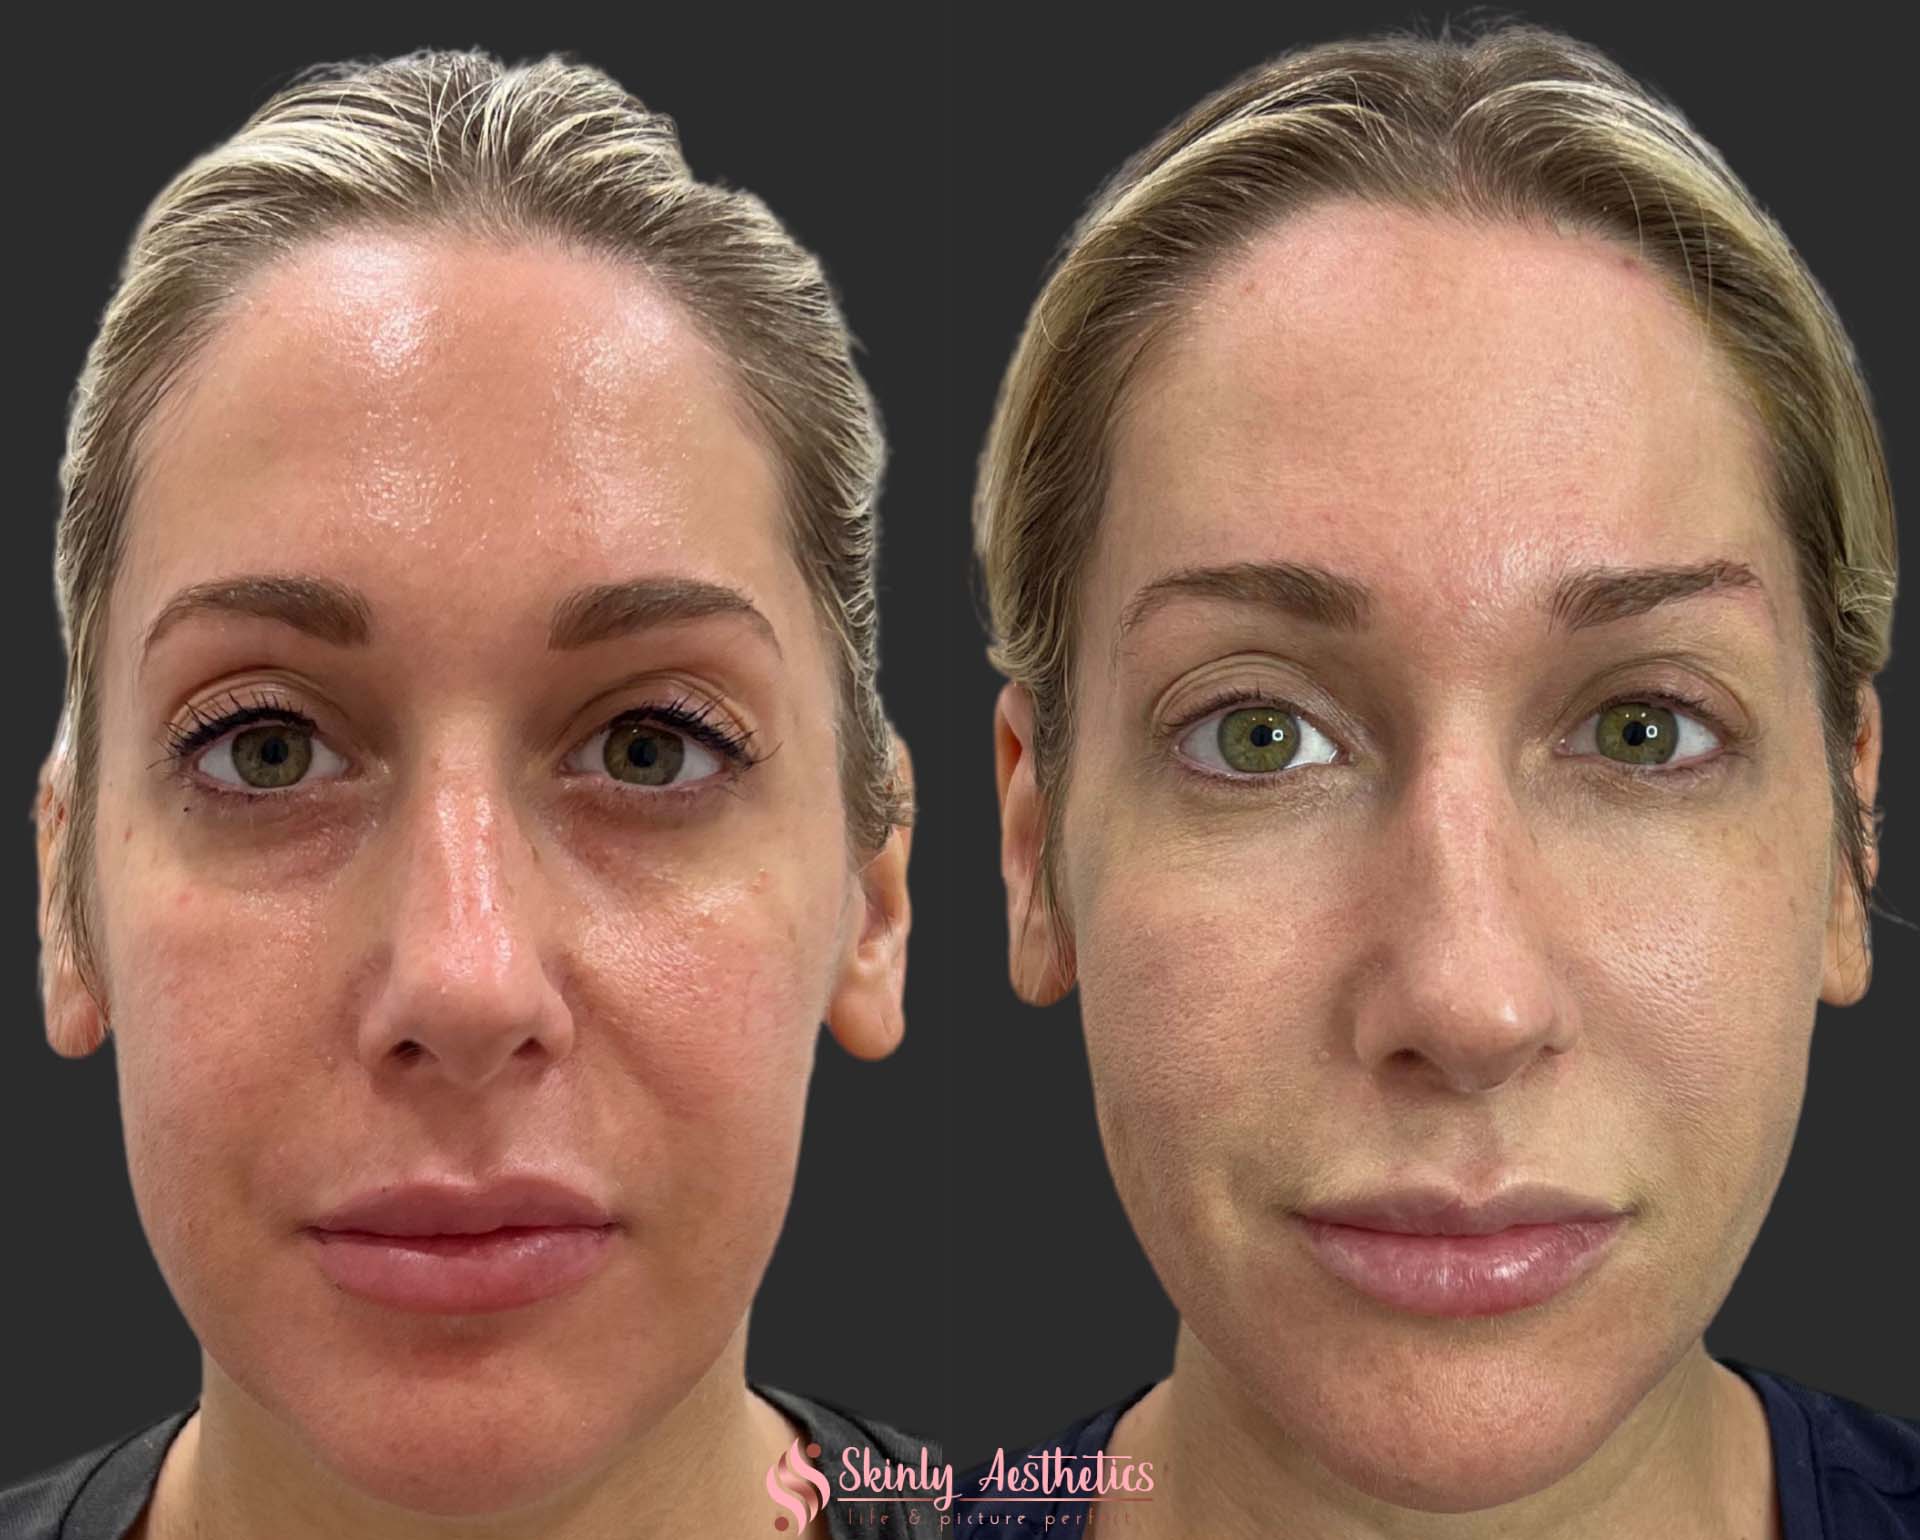 before and after results demonstrating cheek filler augmentation with Juvederm Voluma injection